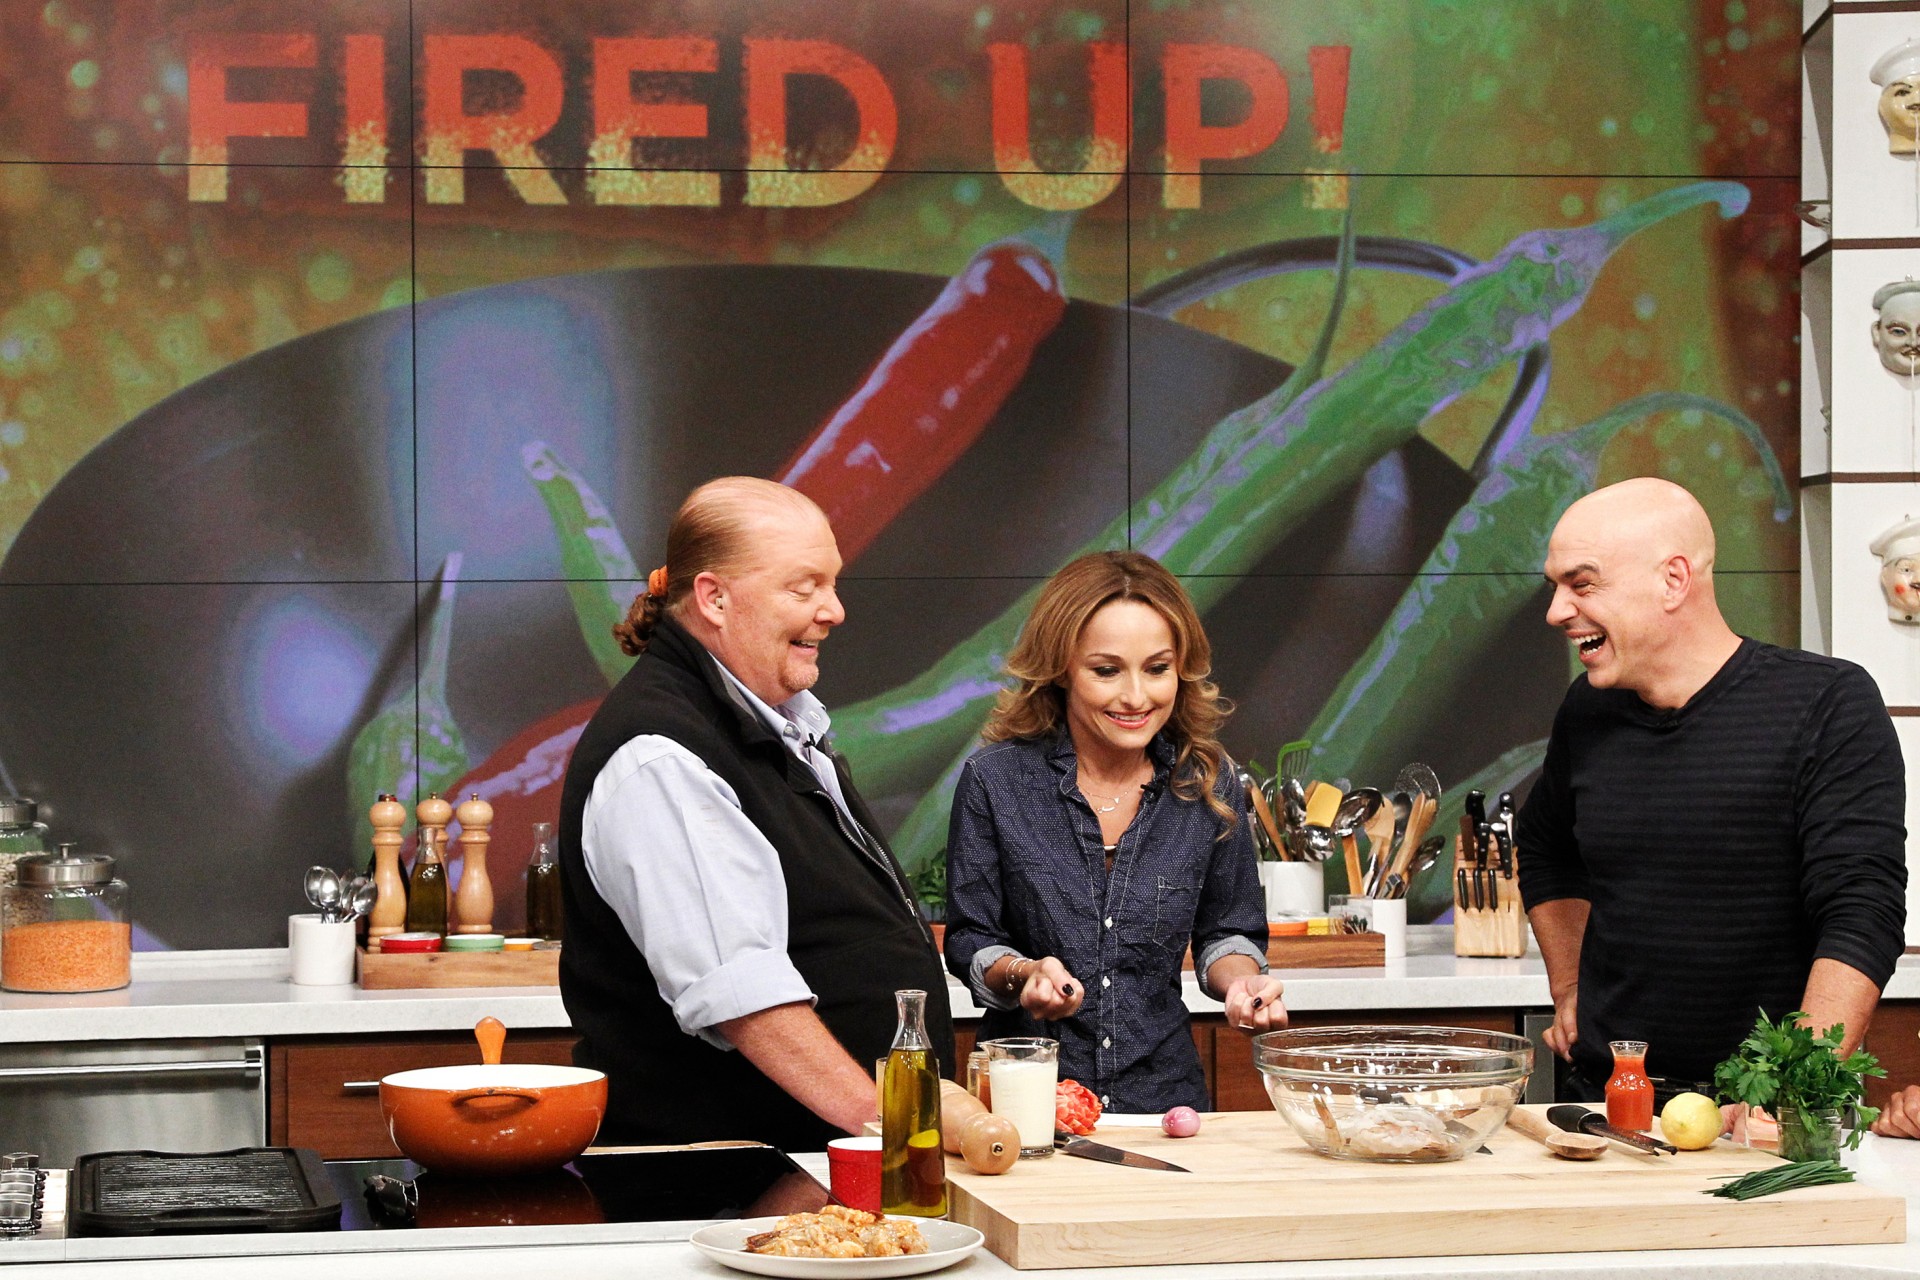 Celebrity chef Giada De Laurentiis during a guest appearance on ABC's The Chew last fall. She can cook rich foods and keep her trim figure, but new research suggests that's a difficult feat for amateur cooks watching along at home. Photo: Lou Rocco/ABC/Getty Images